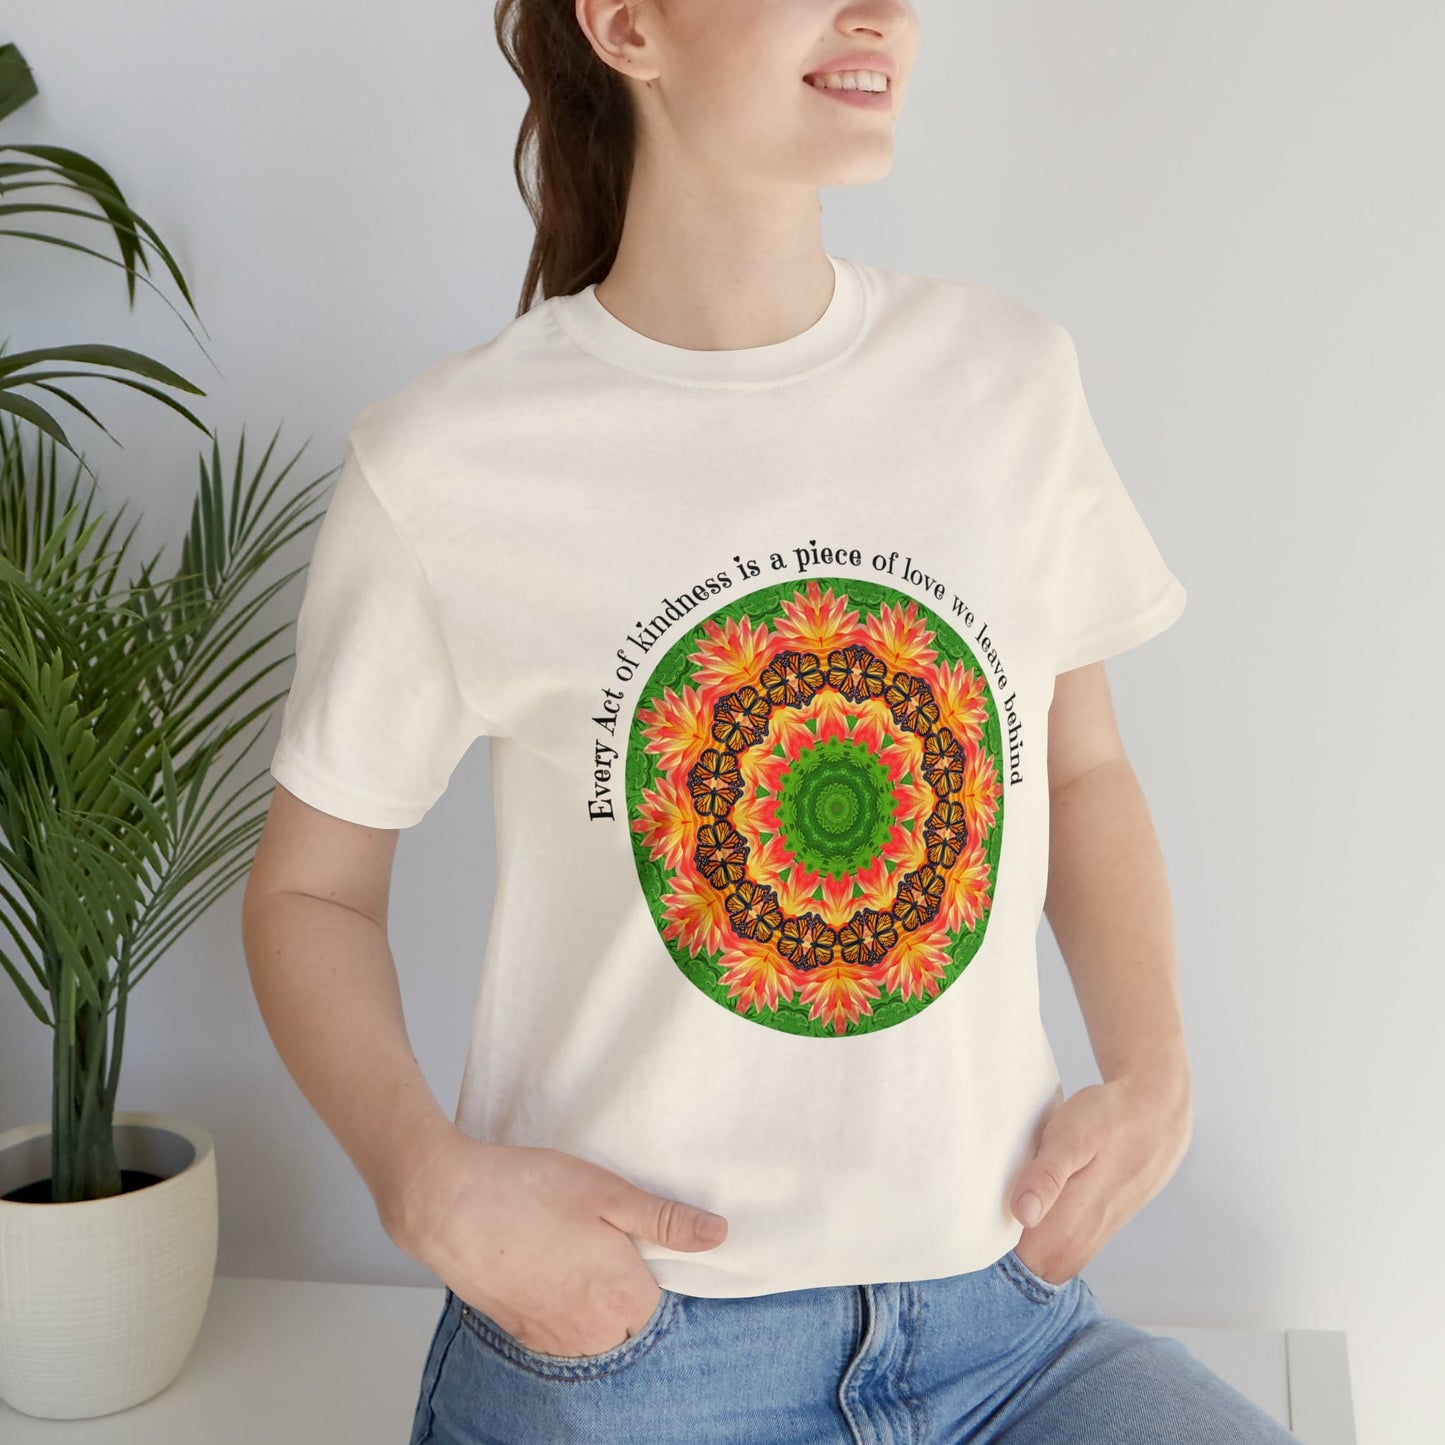 Beautiful Butterfly Mandala Art Graphic Tee Shirt - Cottagecore Clothing A Nature Lovers Delight Ornate Orbit natural